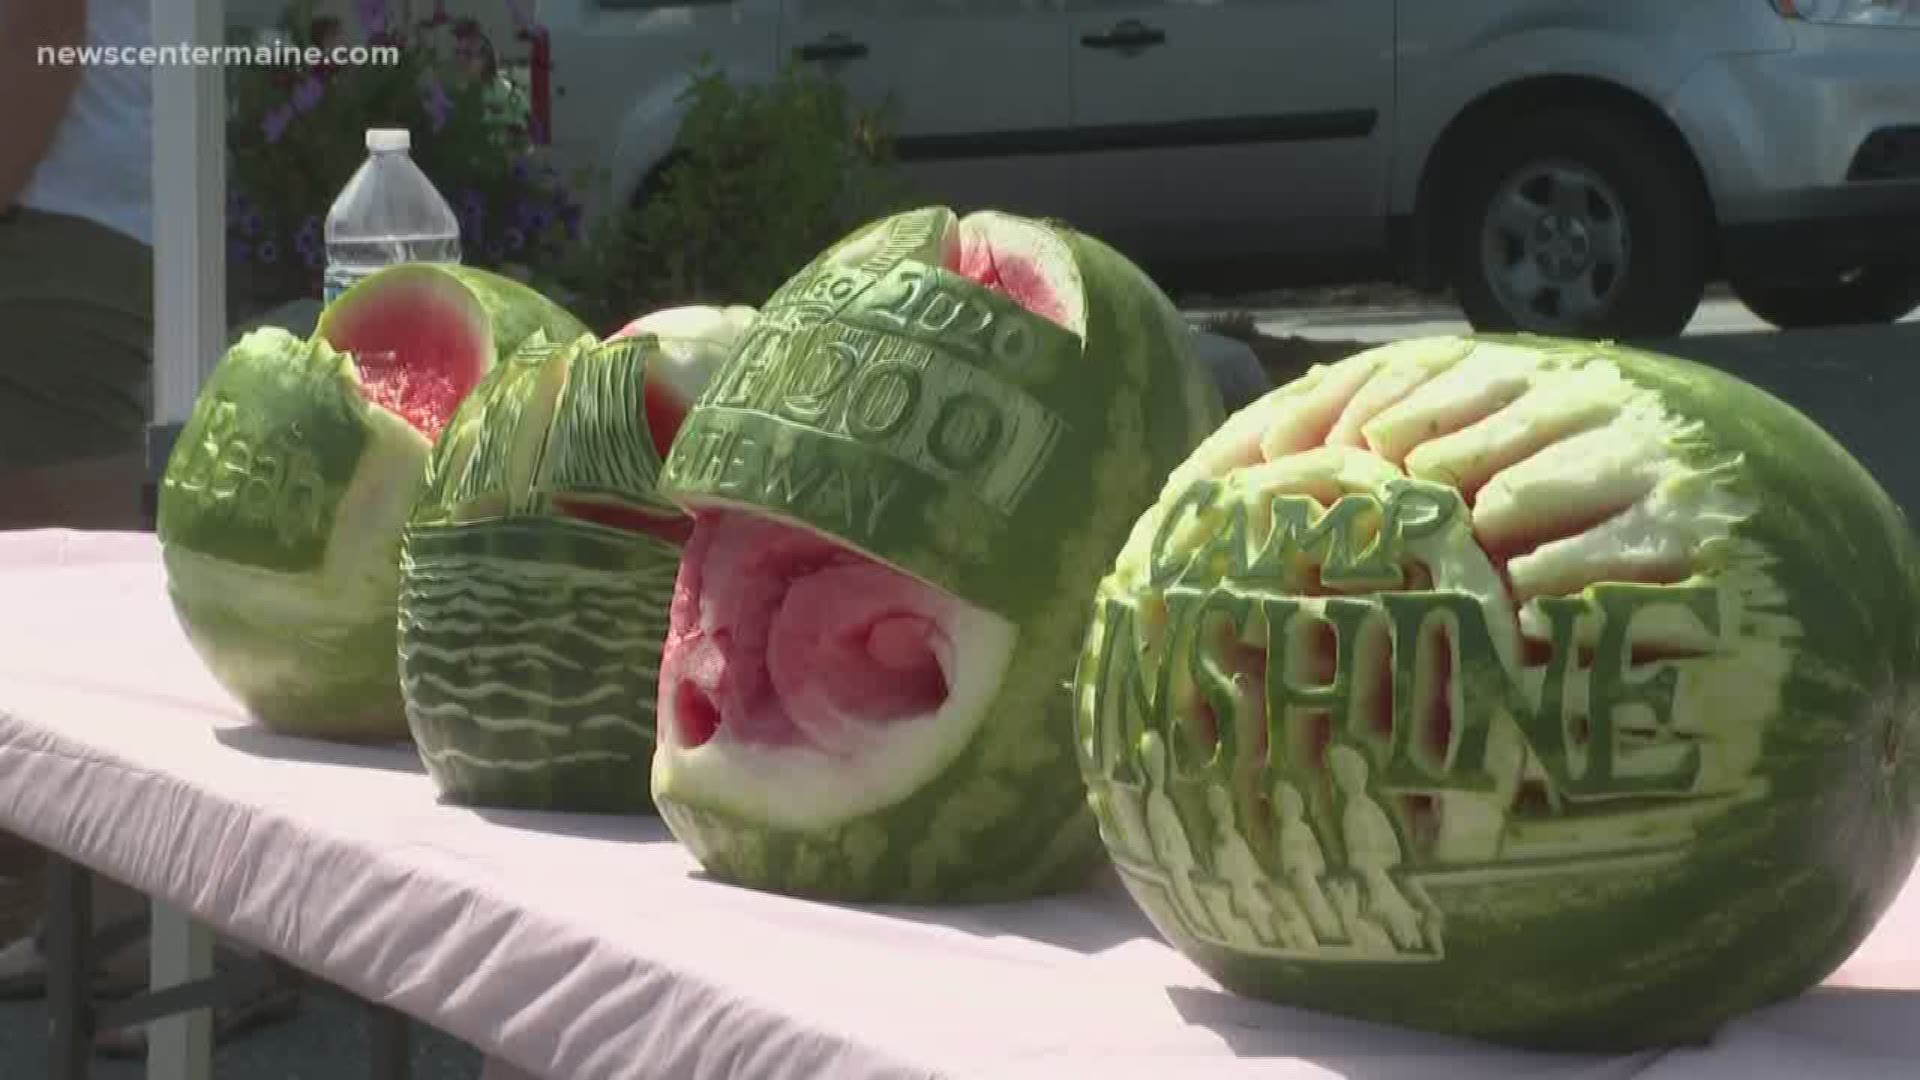 Celebrating Summer and giving back. Hundreds gathered at L.L. Bean in Freeport for the Camp Sunshine Watermelon Festival.